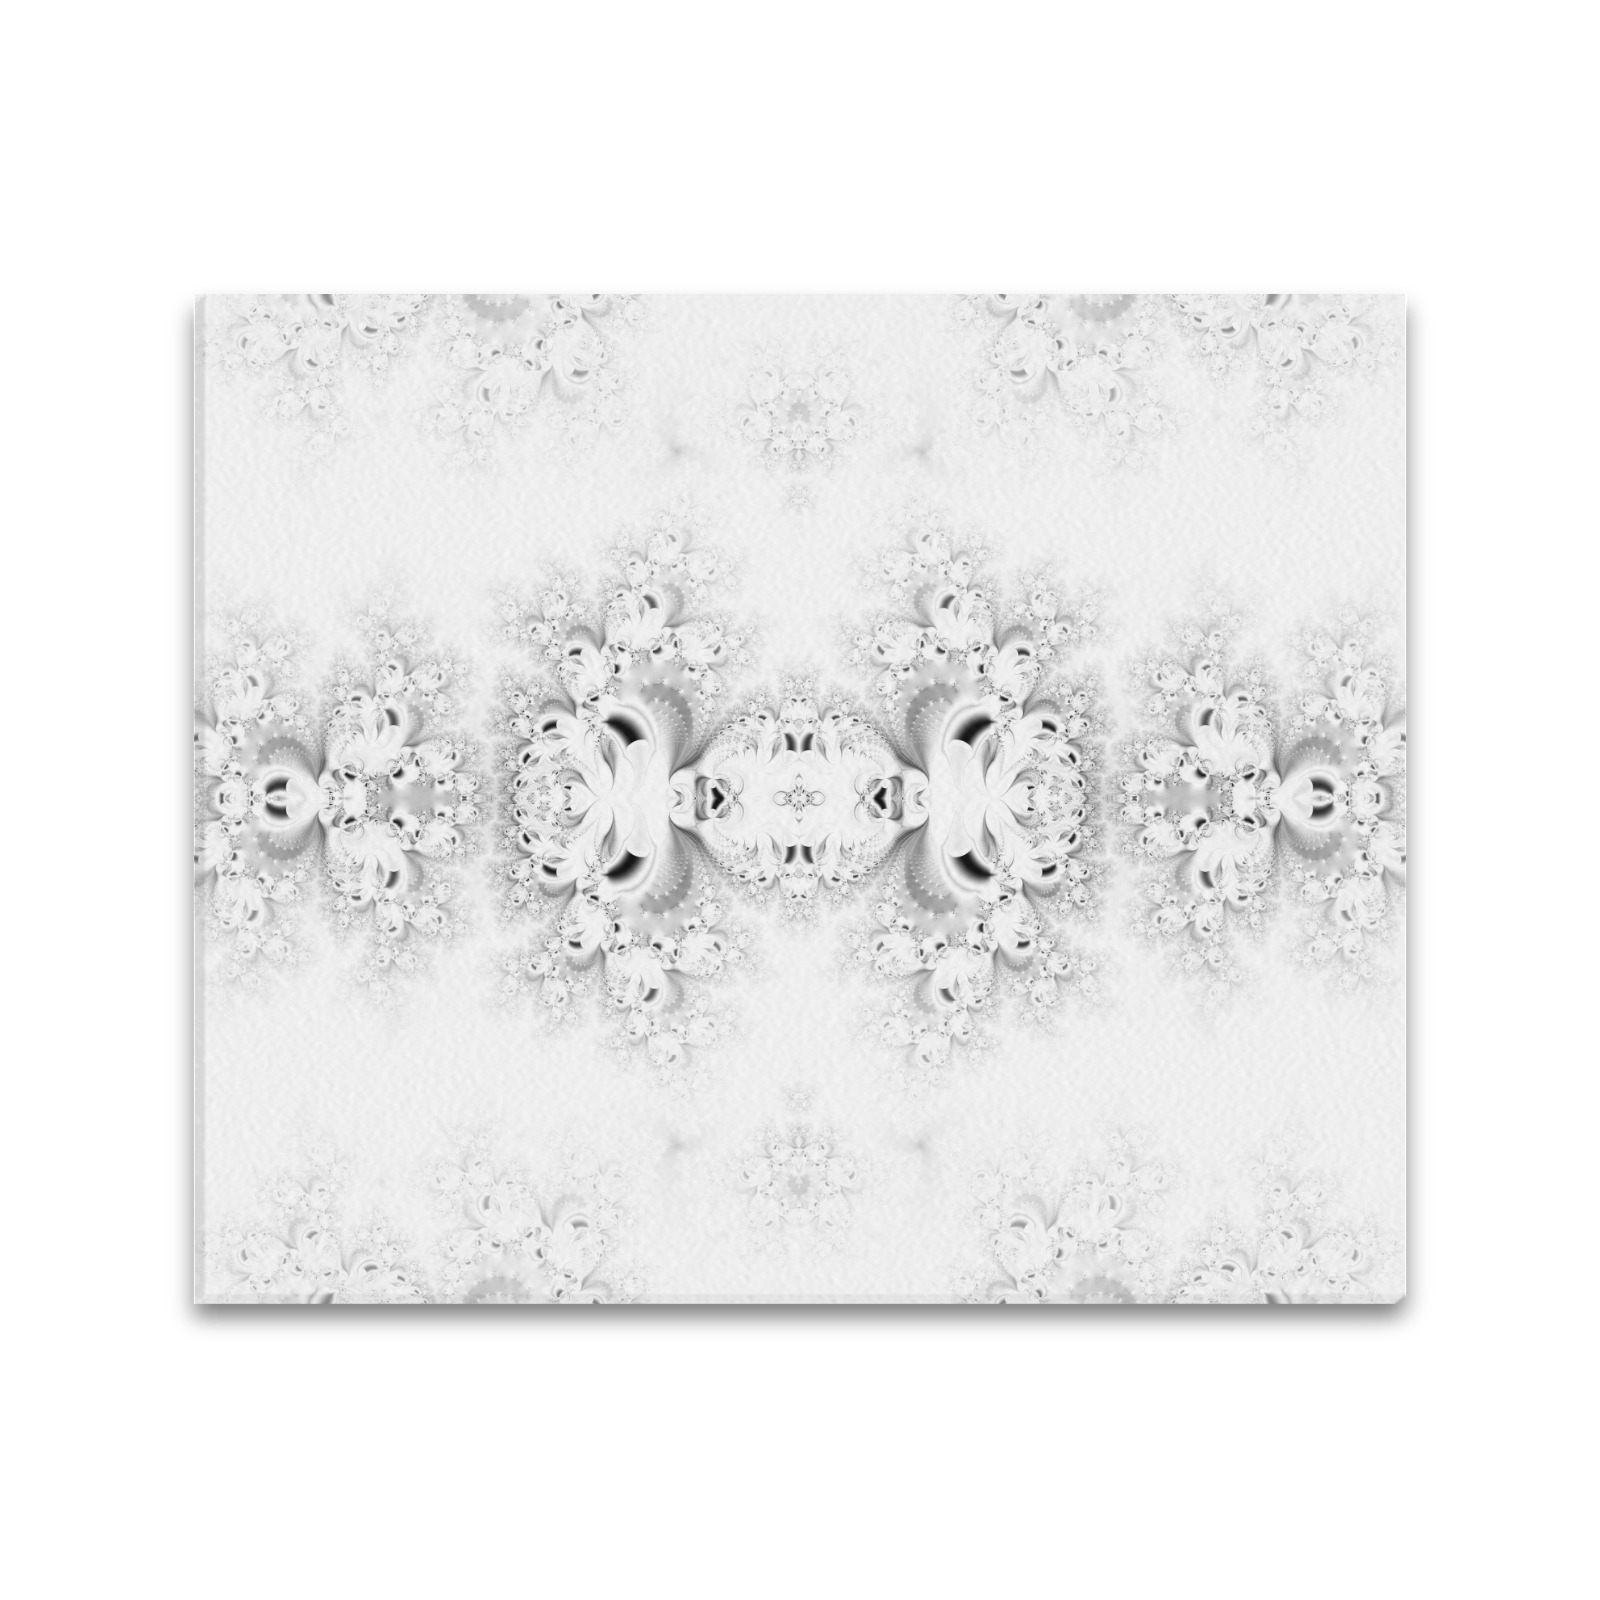 Snowy Winter White Frost Fractal Frame Canvas Print 24"x20"